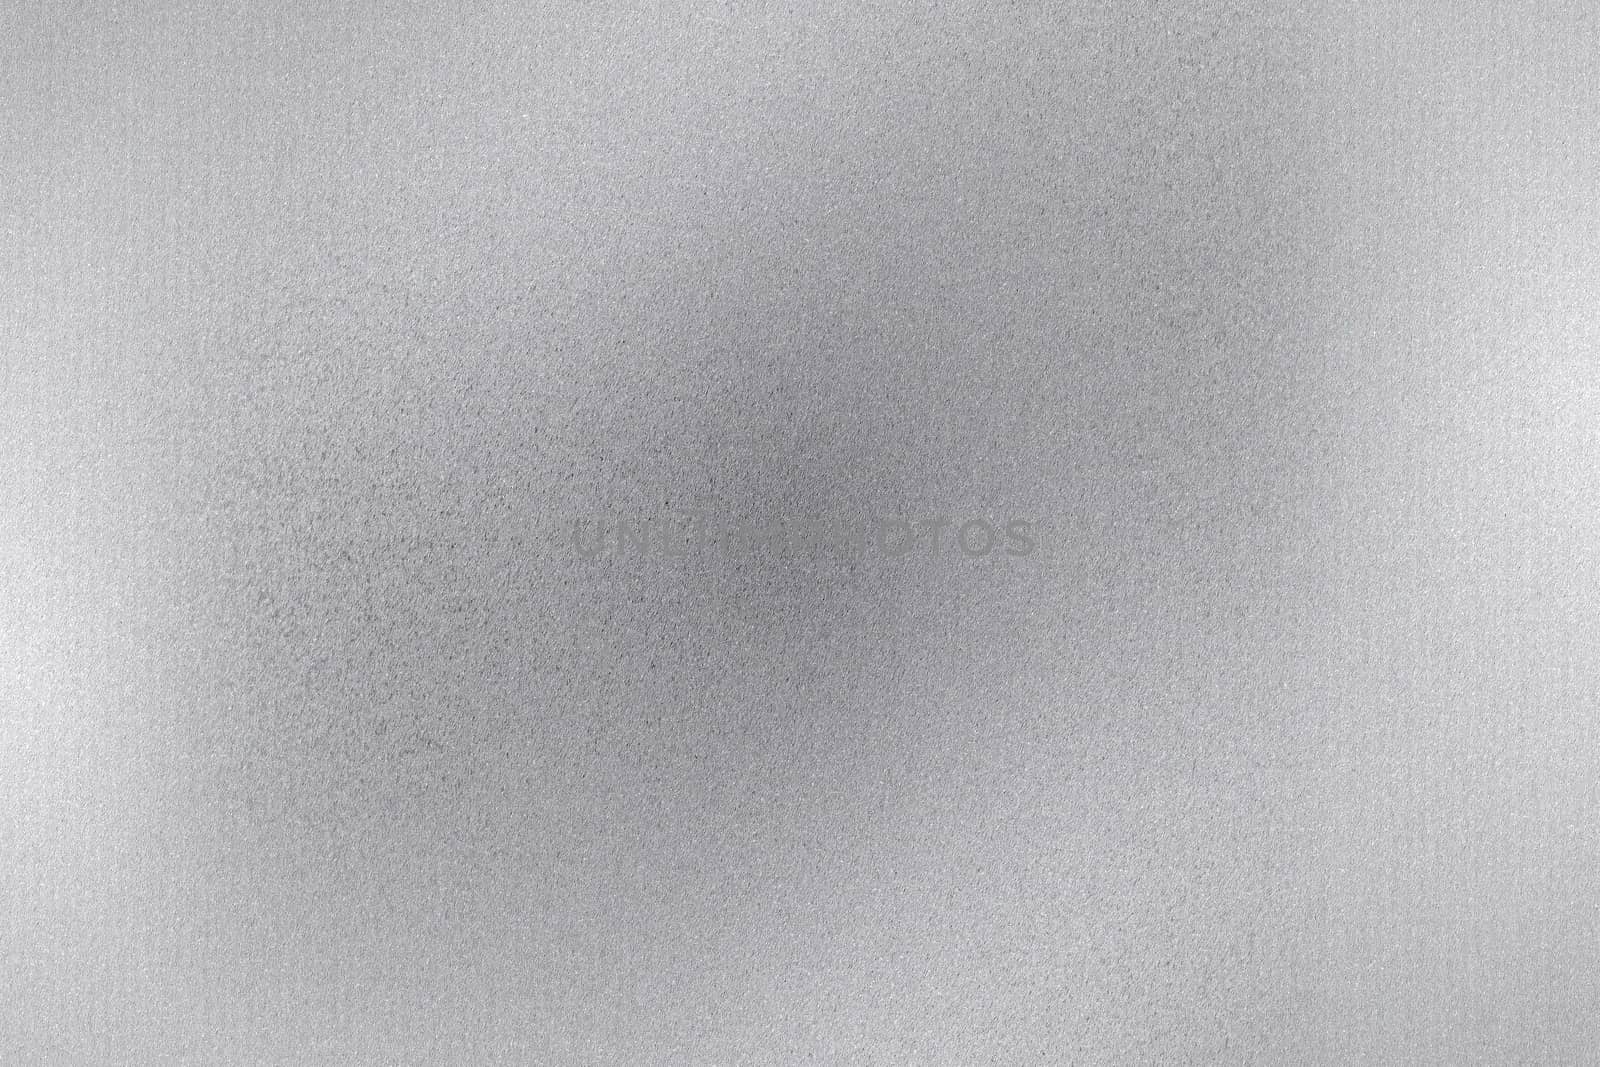 Brushed silver metal sheet surface, abstract texture background